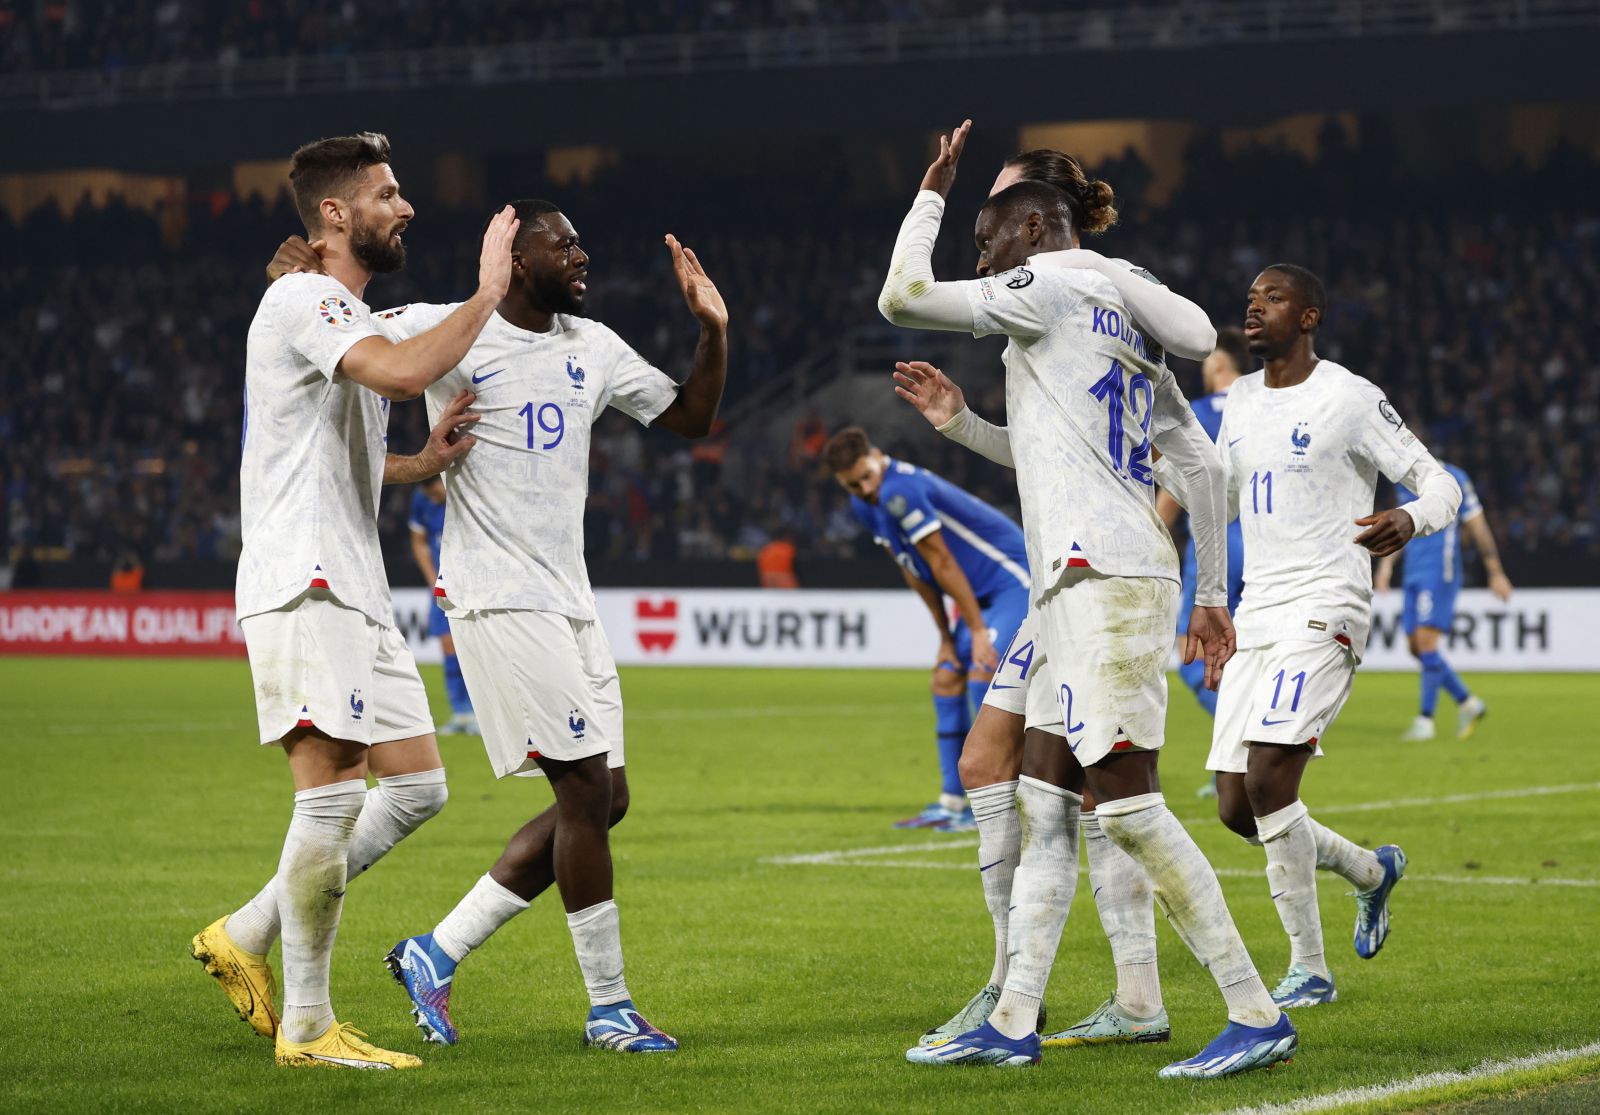 Watch Greece 2:2 France 2023.11.21 All Goals Highlights, Euro Qualifiers 2024, Video Euro Qualifiers 2024, Vòng loại Euro 2024, Euro 2024 Full Goals Highlights, Video Vòng Loại Euro 2024, Full Match Euro 2024, Euro 2024, Video Greece 2:2 France all goals highlights, Clip highlights Greece 2:2 France, Clip Greece 2:2 France, Clip bàn thắng Greece 2:2 Pháp, Greece Full Goals Highlight, France Full Goals Highlight